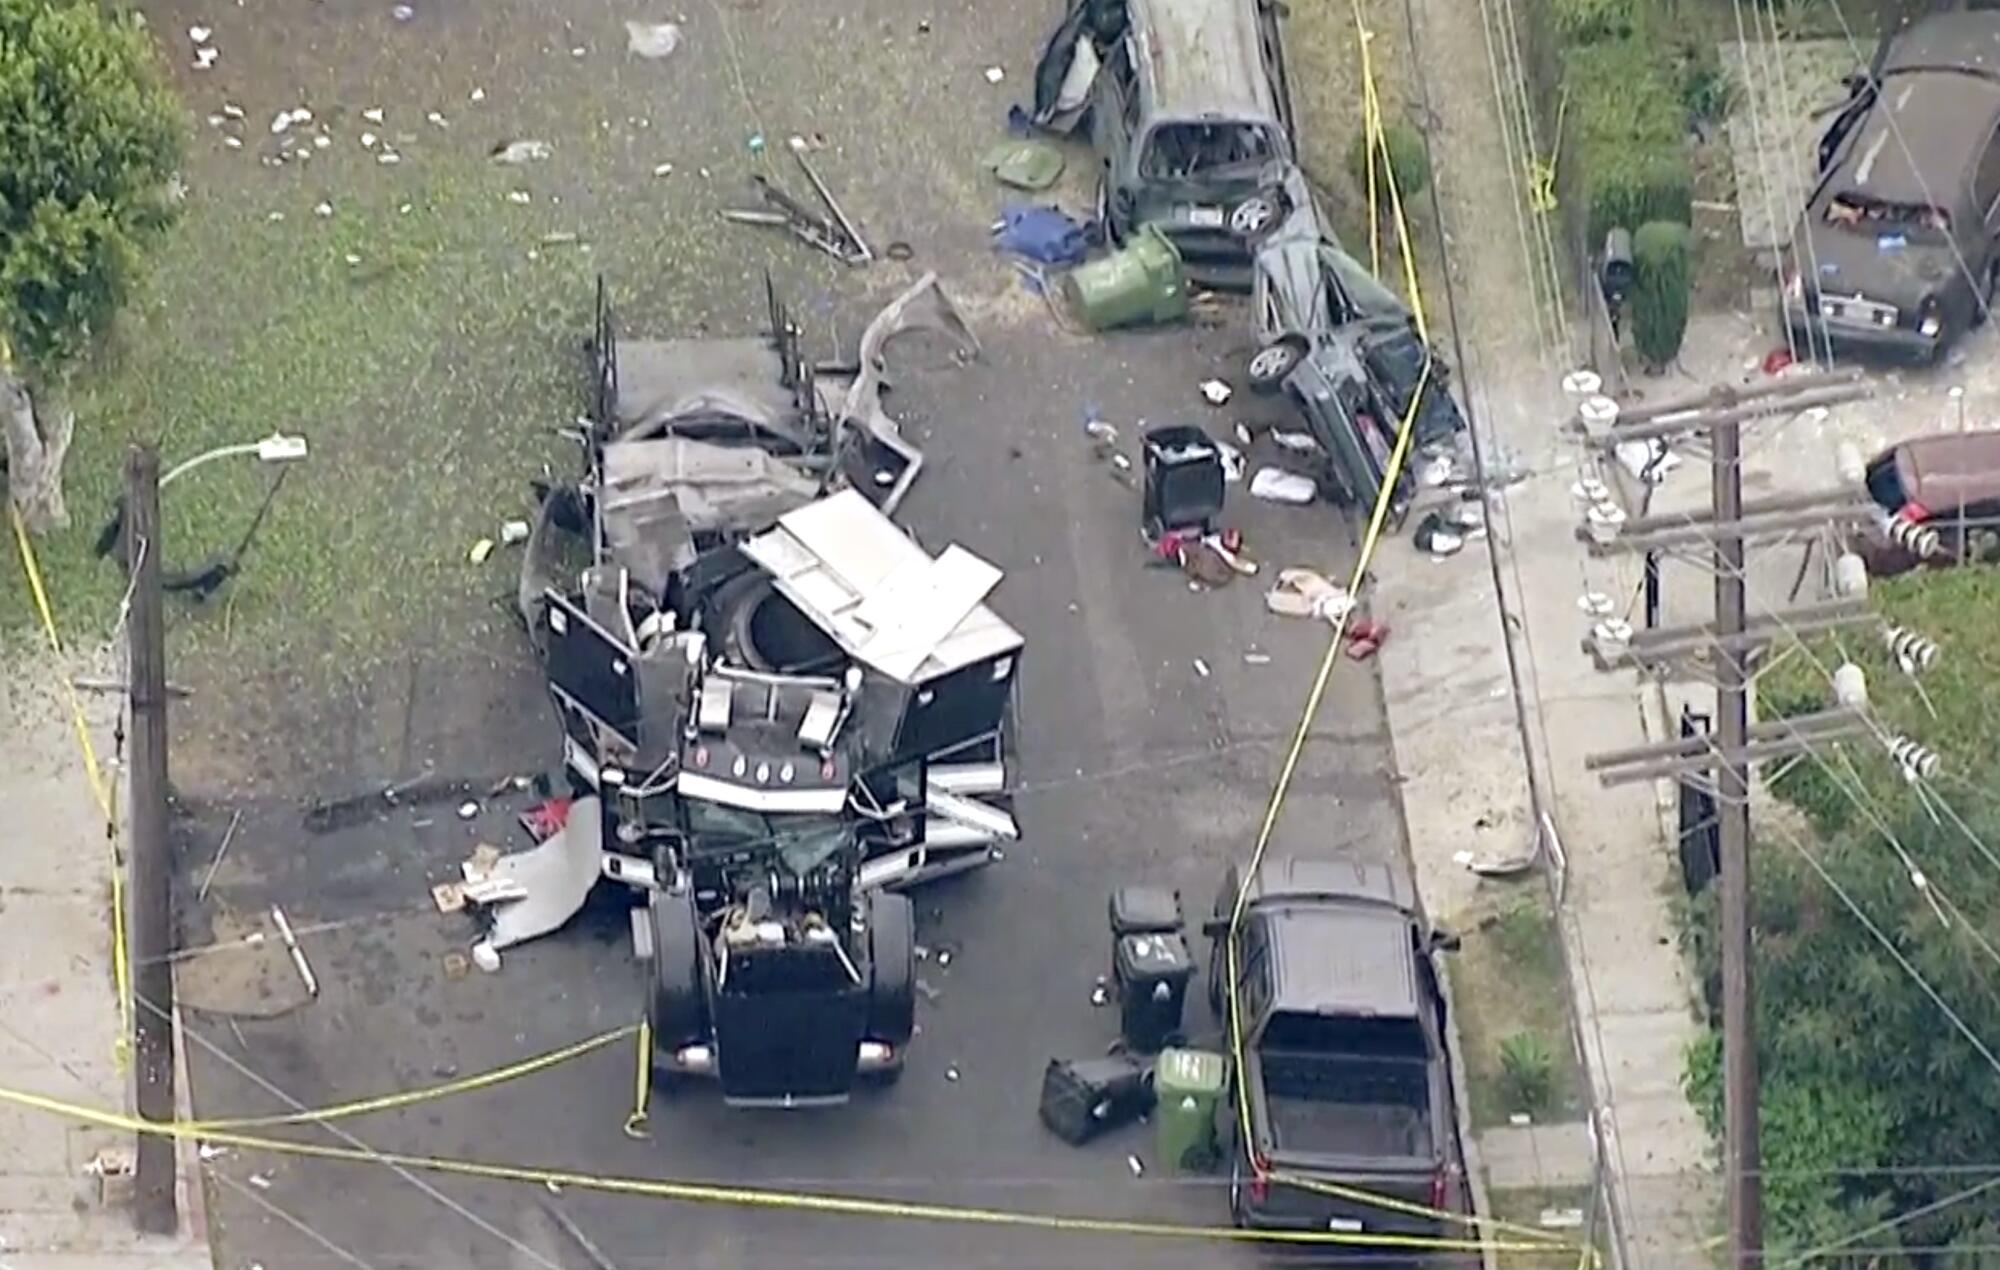 Aerial image shows the remains of an armored Los Angeles Police Department tractor-trailer after fireworks exploded.